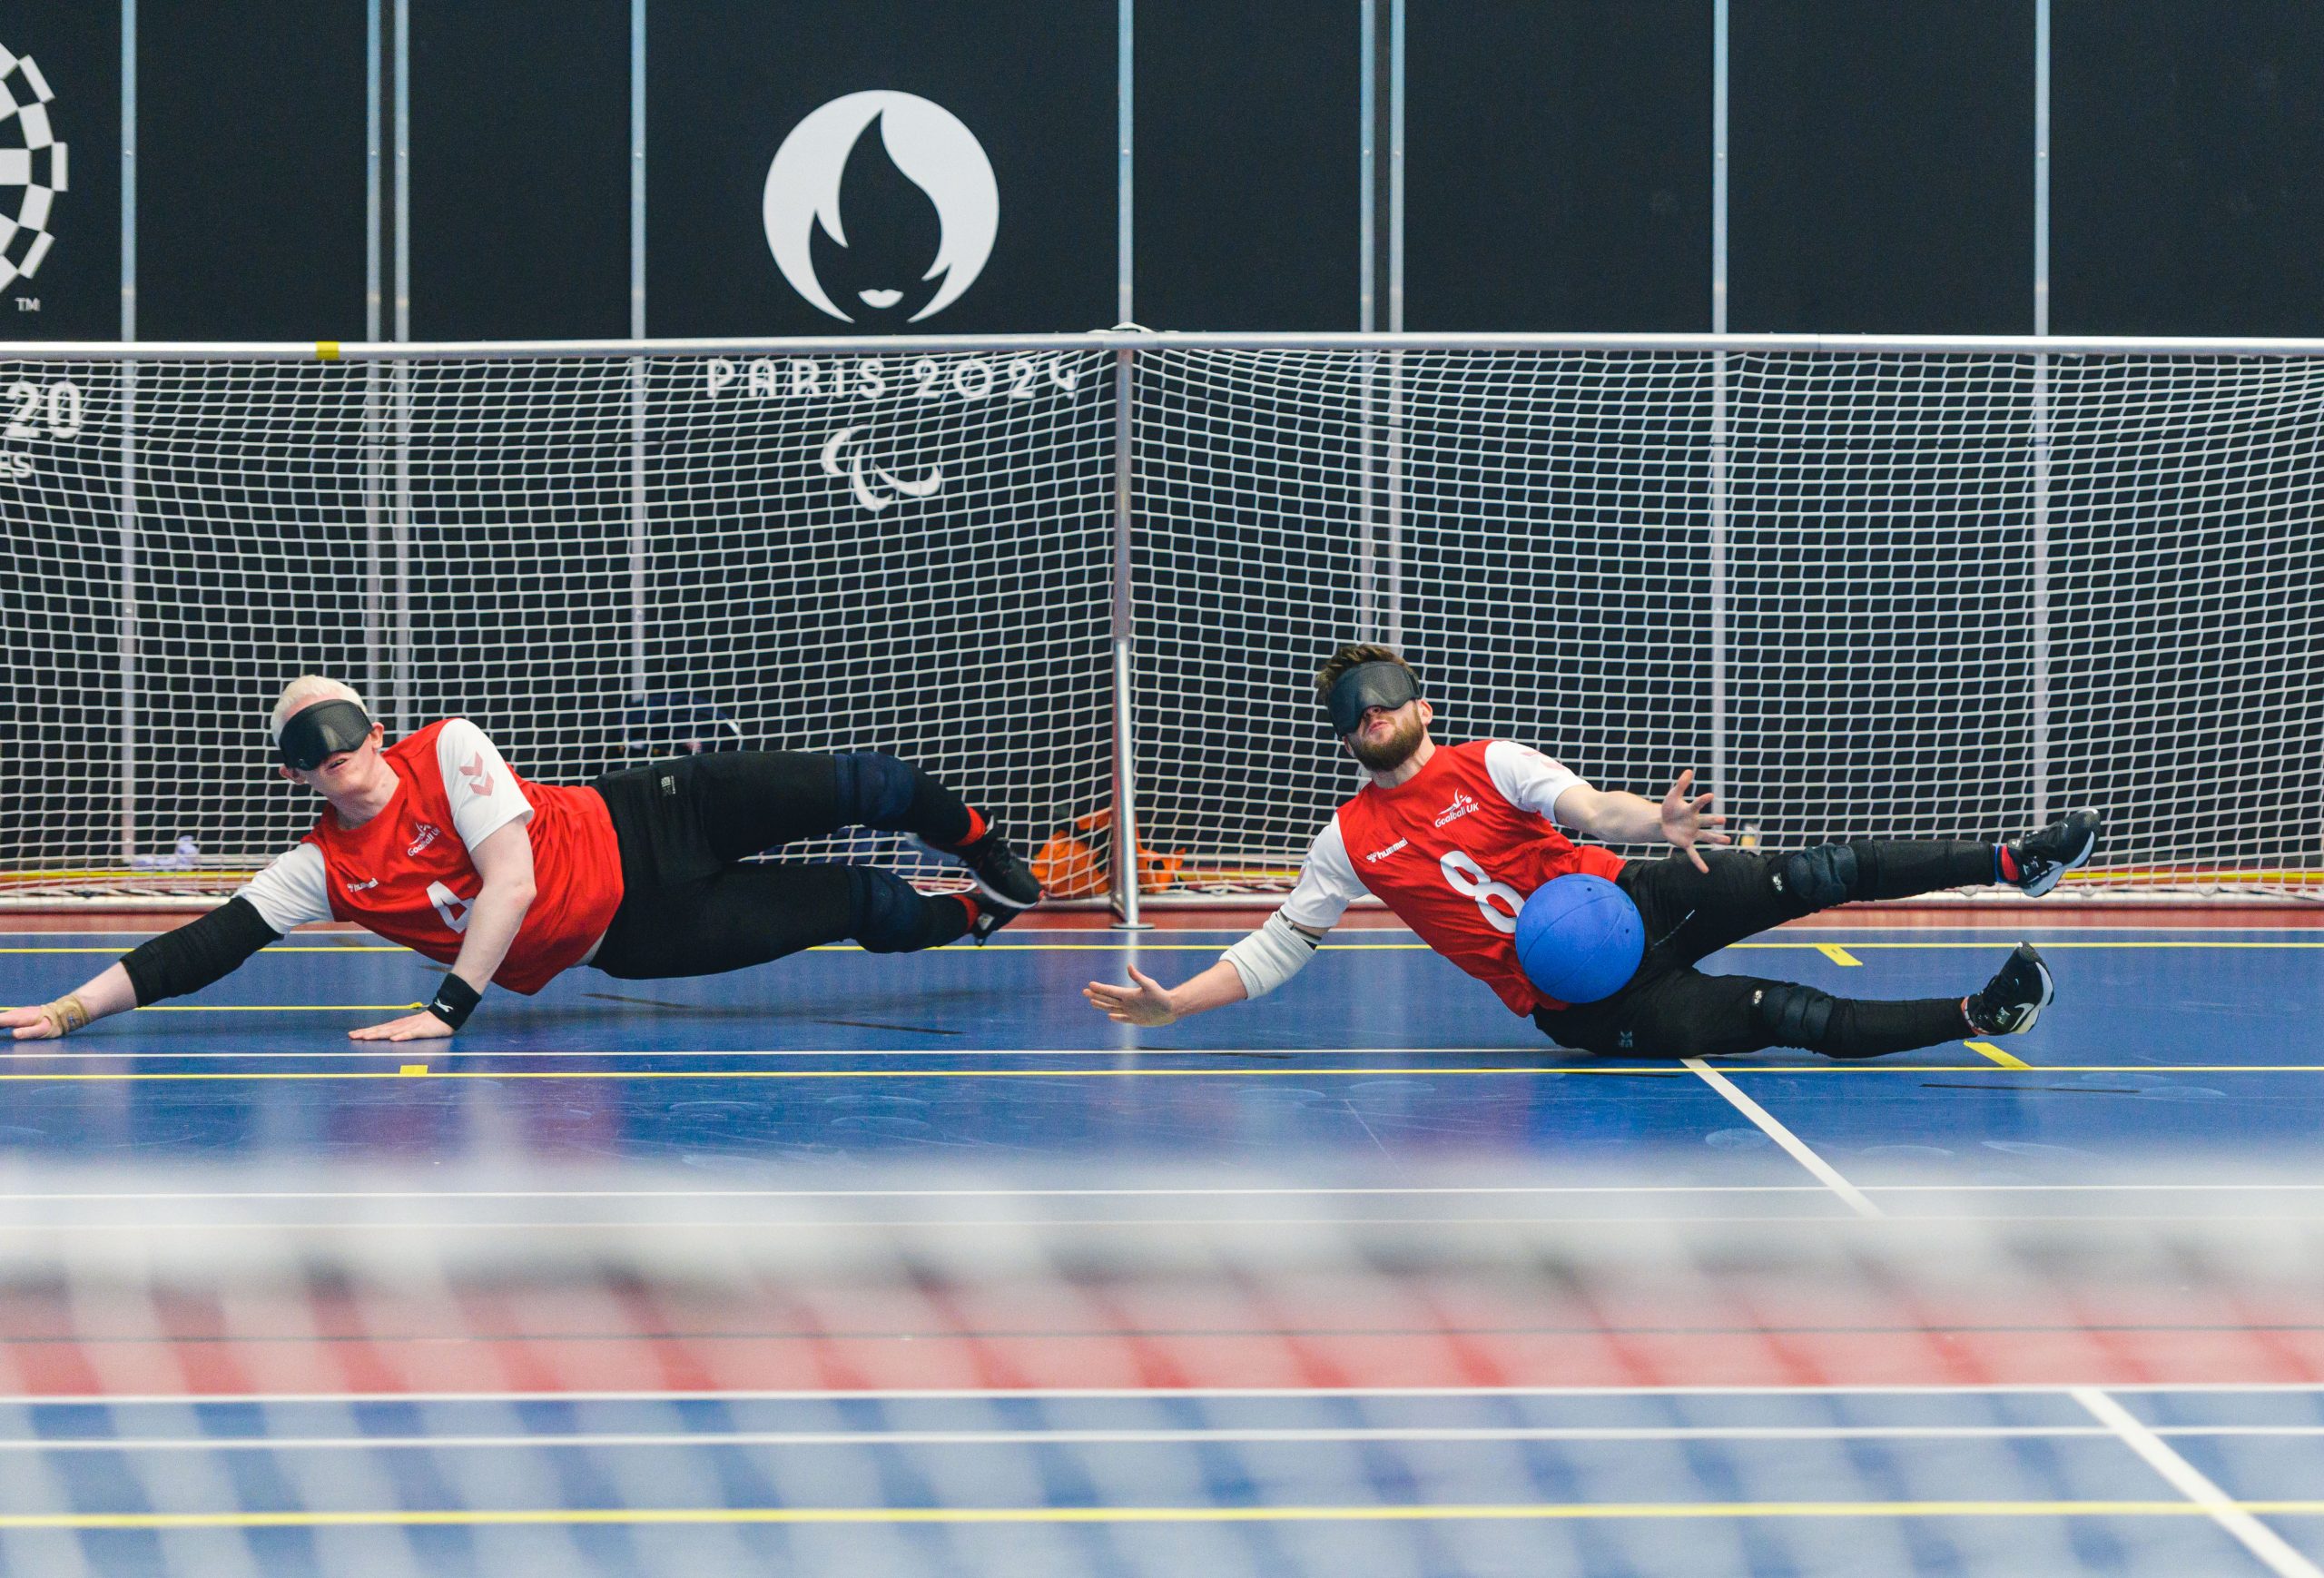 Action shot of two male goalball players defending a goal with their body